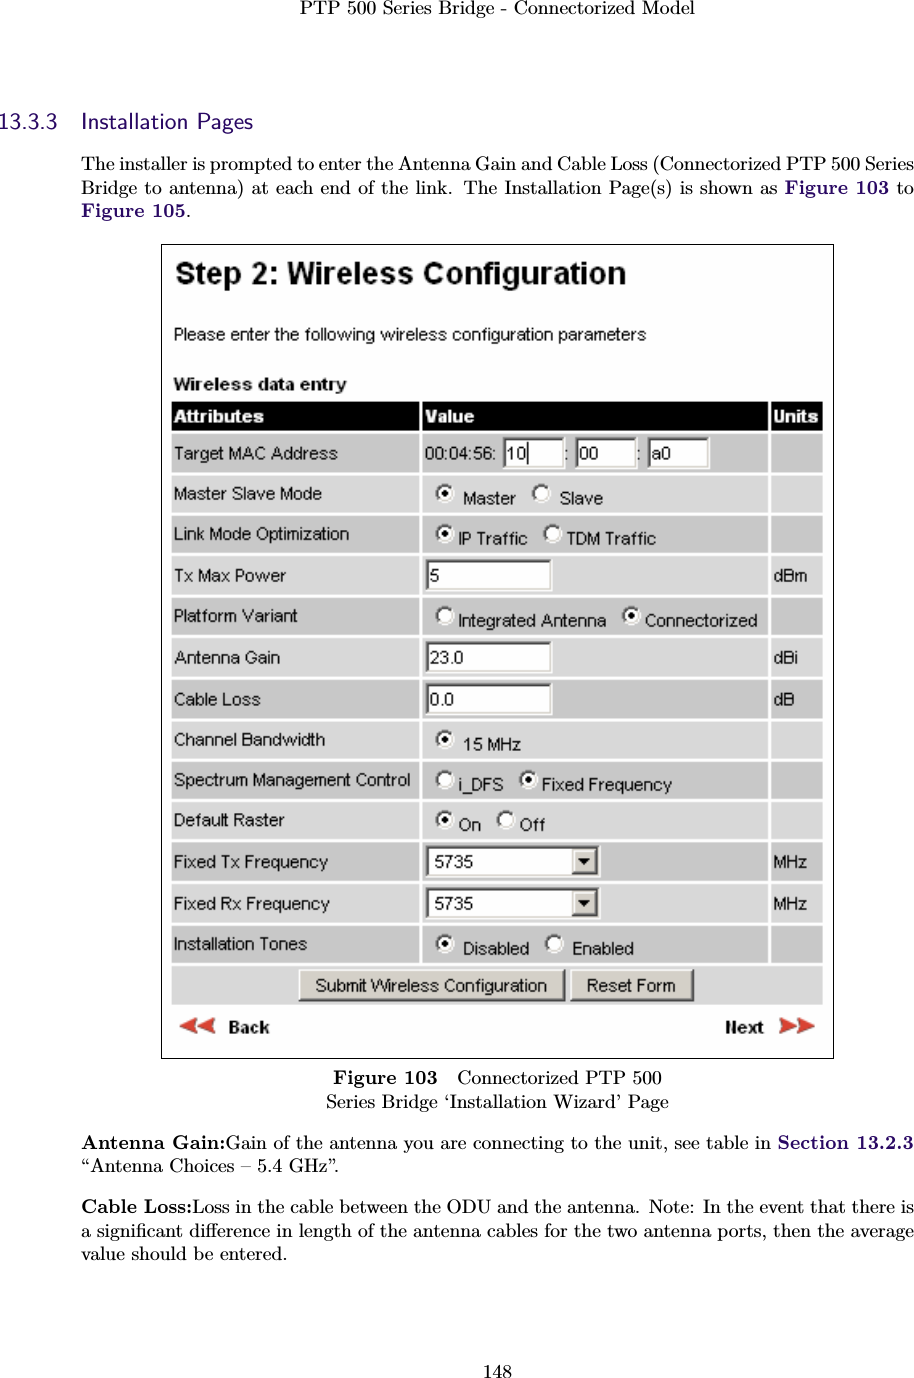 PTP 500 Series Bridge - Connectorized Model14813.3.3 Installation PagesThe installer is prompted to enter the Antenna Gain and Cable Loss (Connectorized PTP 500 SeriesBridge to antenna) at each end of the link. The Installation Page(s) is shown as Figure 103 toFigure 105.Figure 103 Connectorized PTP 500Series Bridge ‘Installation Wizard’ PageAntenna Gain:Gain of the antenna you are connecting to the unit, see table in Section 13.2.3“Antenna Choices – 5.4 GHz”.Cable Loss:Loss in the cable between the ODU and the antenna. Note: In the event that there isa signiﬁcant diﬀerence in length of the antenna cables for the two antenna ports, then the averagevalue should be entered.